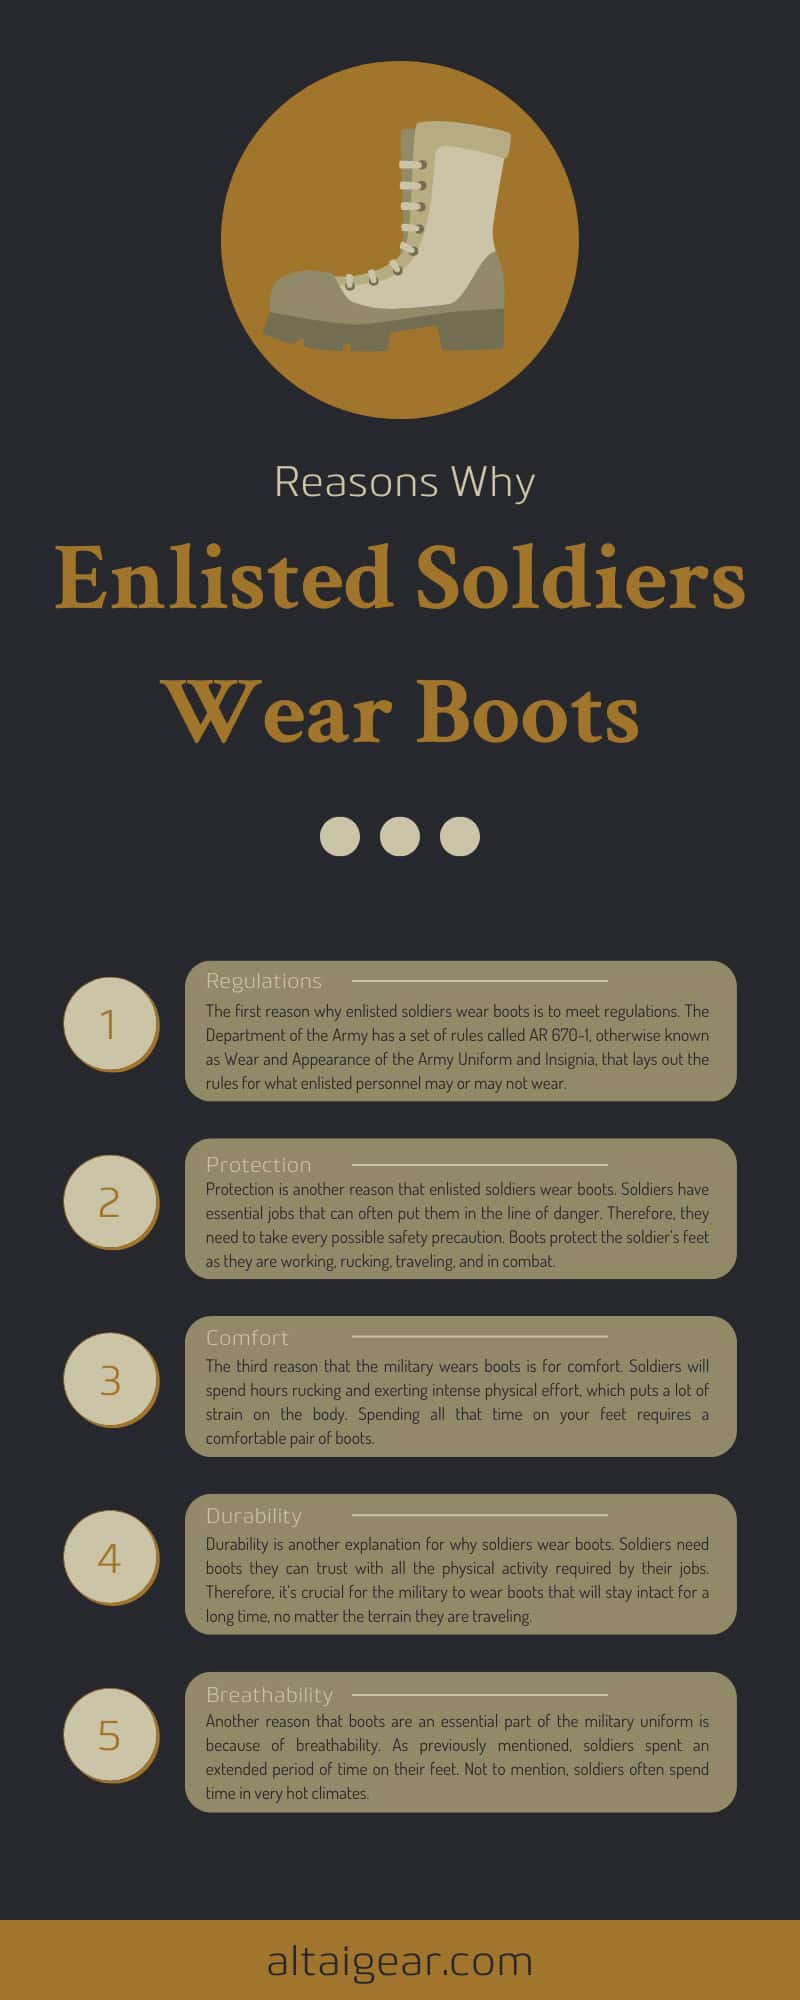 8 Reasons Why Enlisted Soldiers Wear Boots